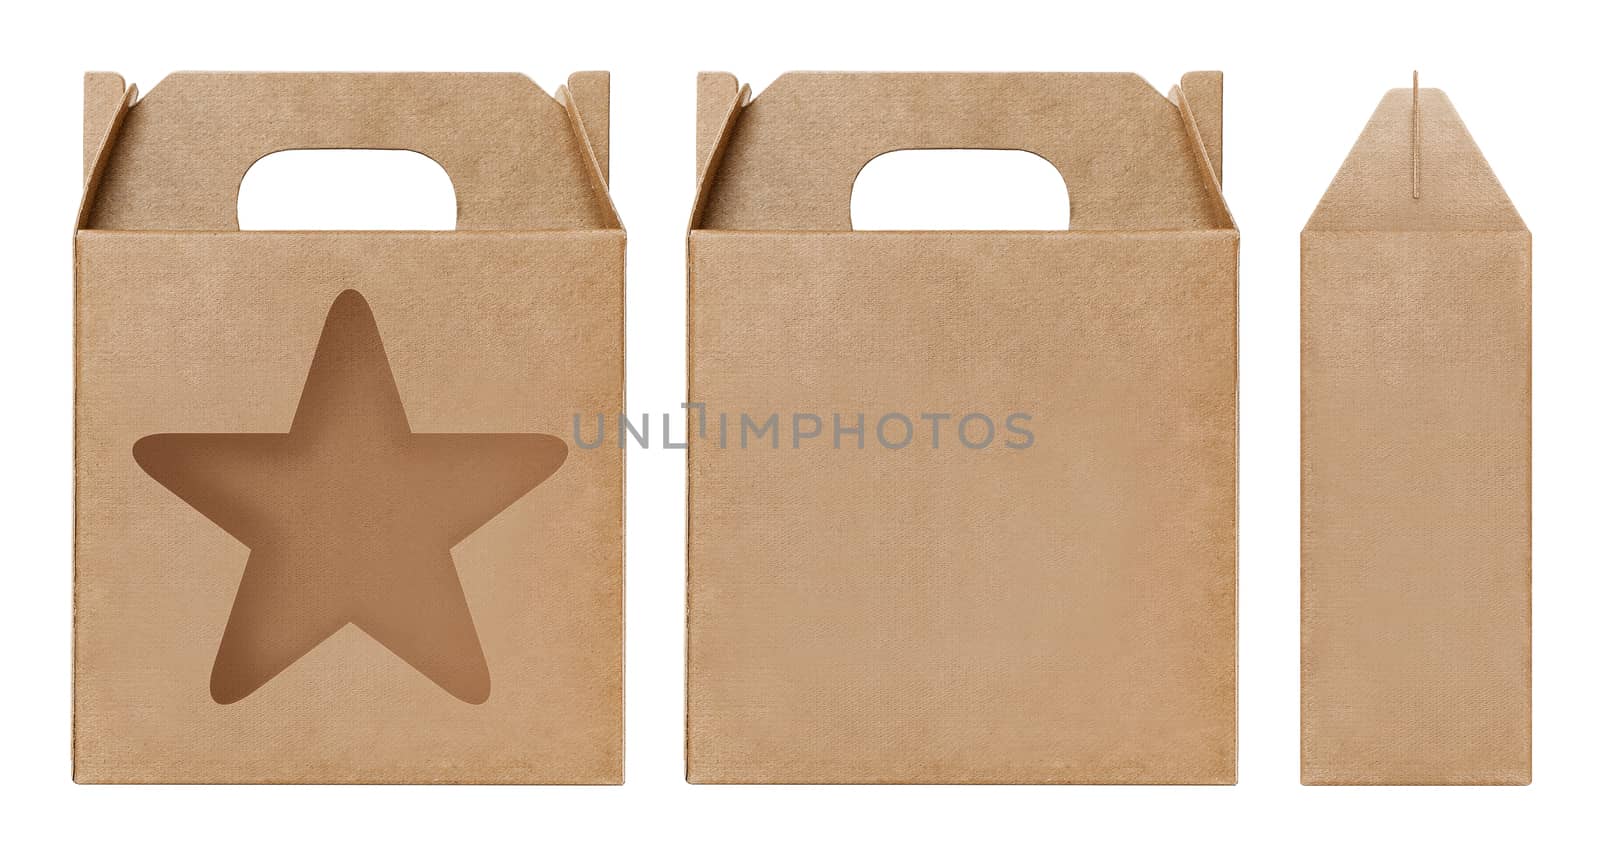 Box brown window Star shape cut out Packaging template, Empty kraft Box Cardboard isolated white background, Boxes Paper kraft natural material, Gift Box Brown Paper from Industrial Packaging carton by cgdeaw